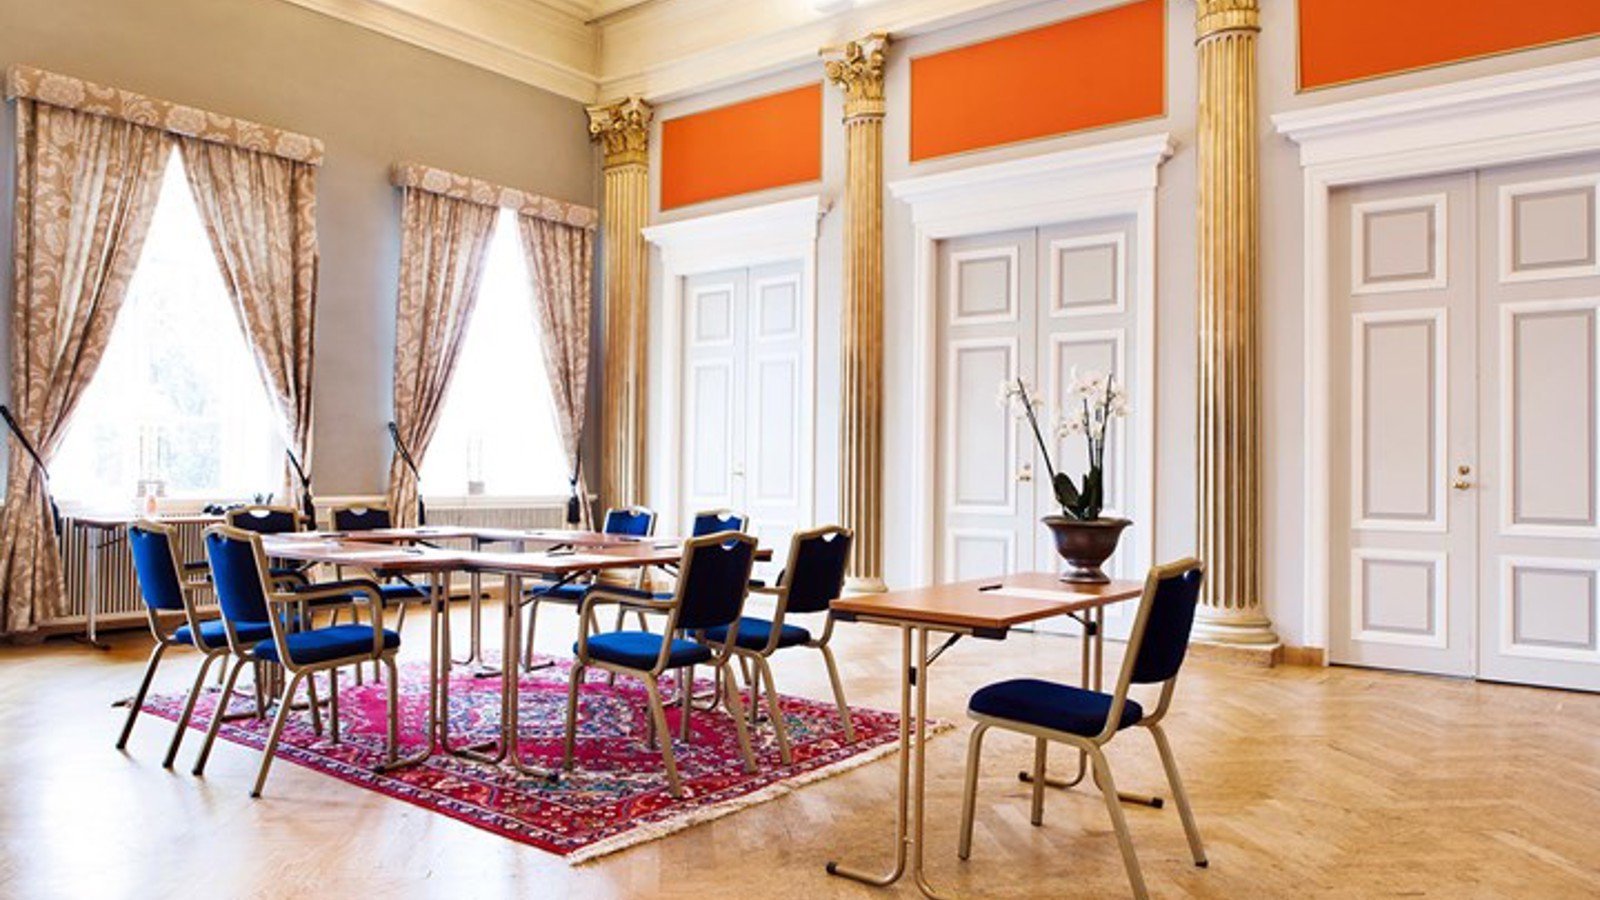 Conference room with high ceiling, gold pillars, large windows and blue chairs